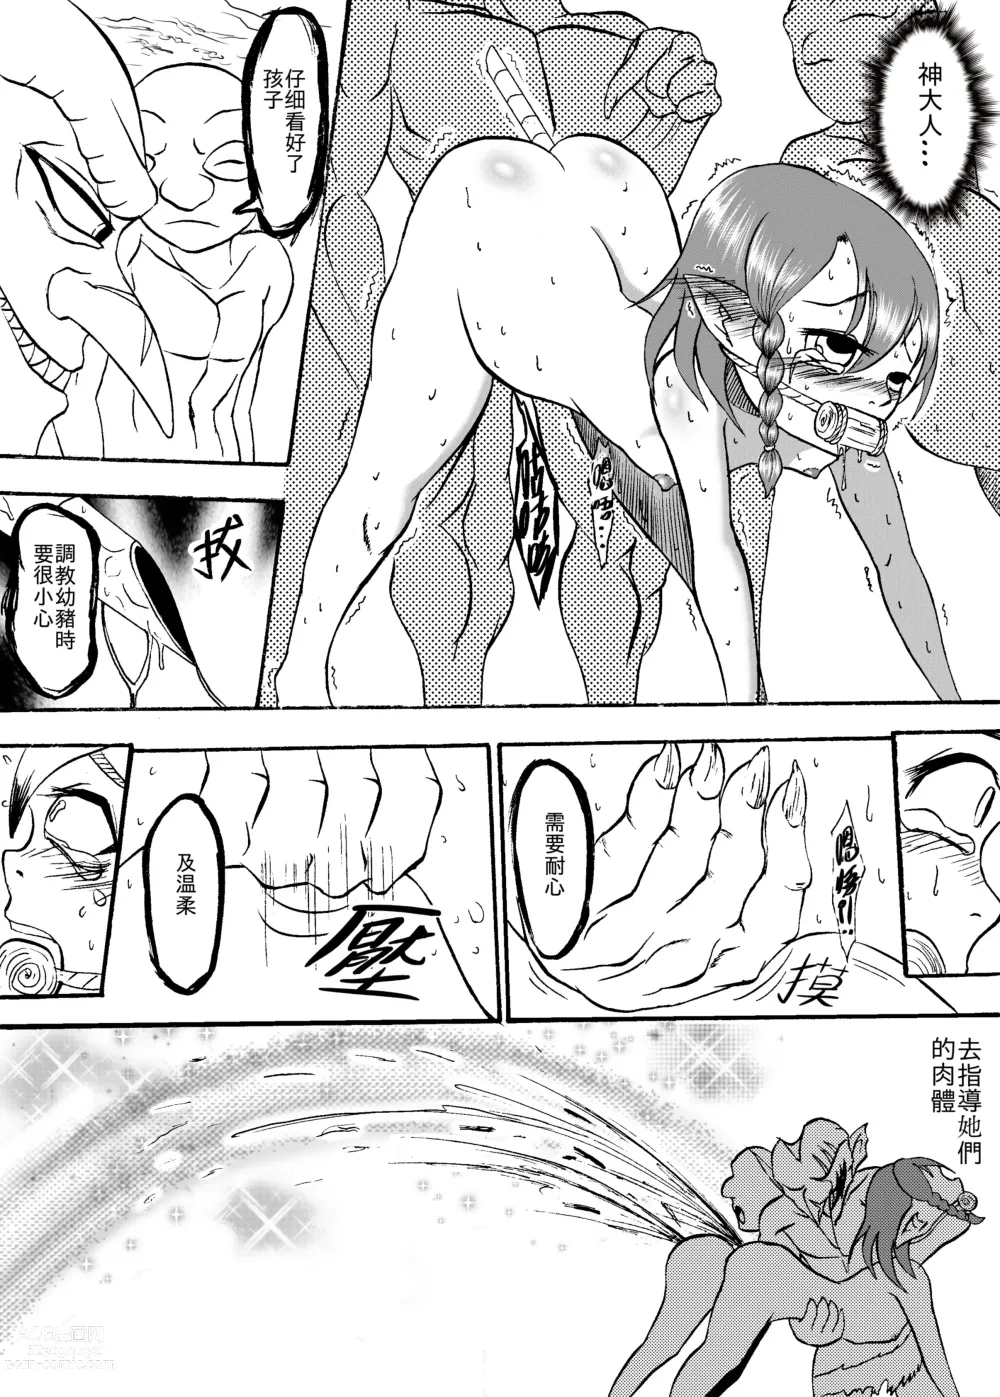 Page 5 of manga 哥布林傳奇7 Goblin Legend Chapter